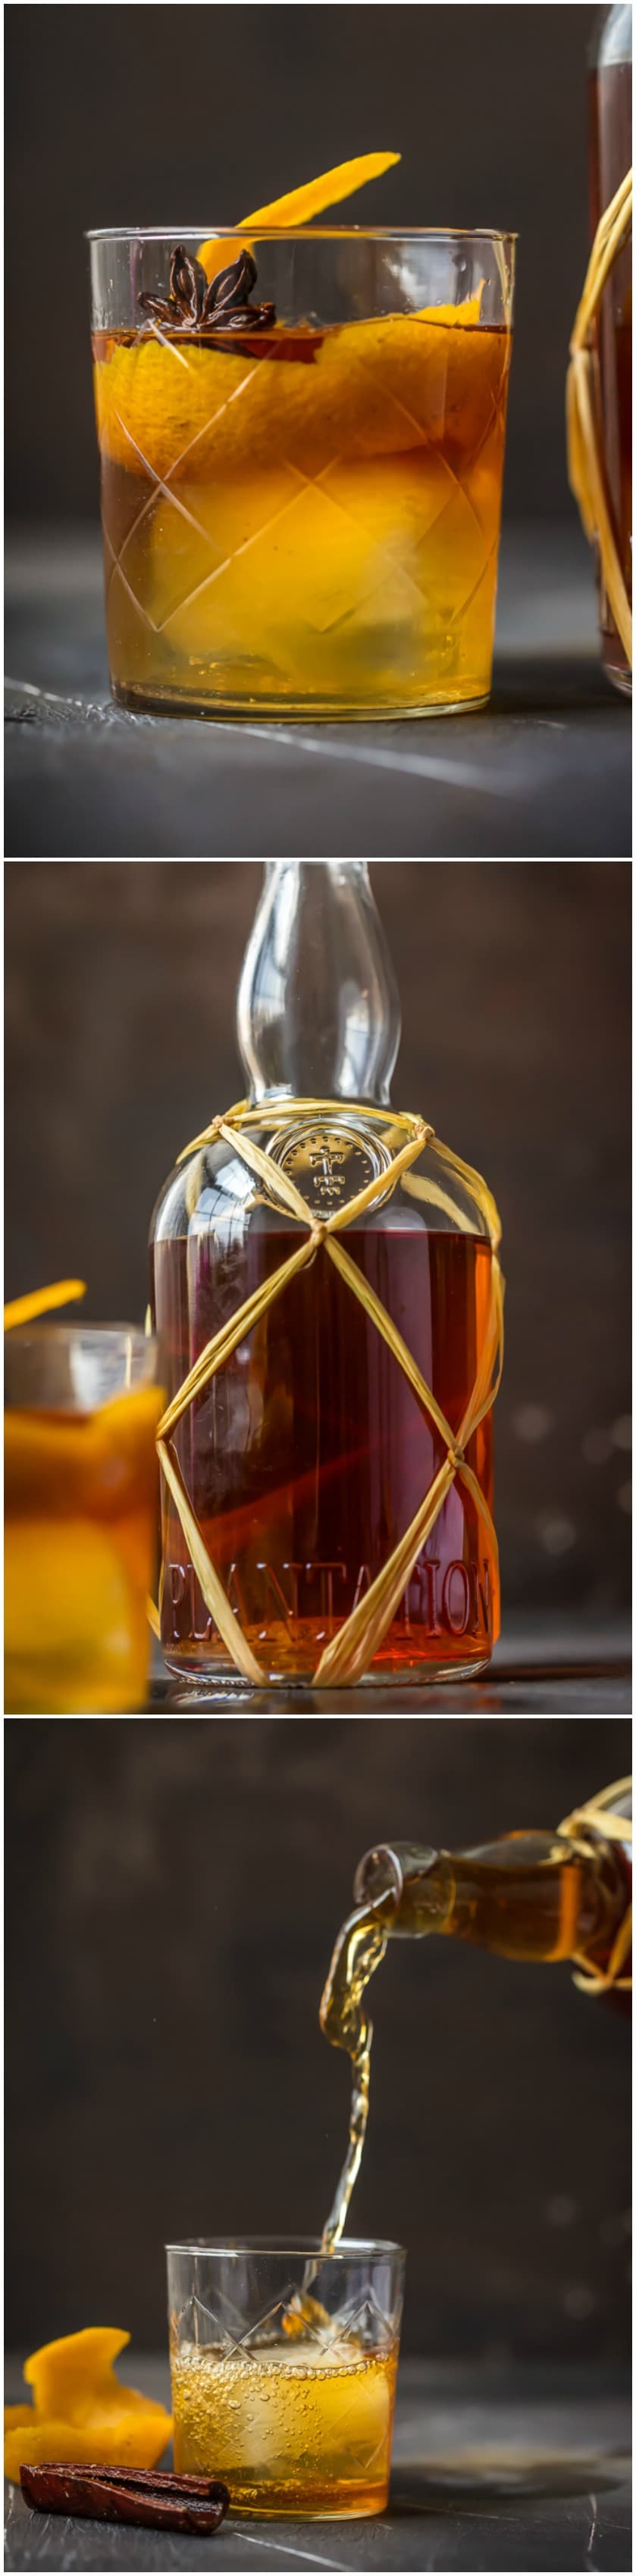 HOMEMADE SPICED RUM is so much easier than you think, and will blow you away with all the flavor! So much tastier than buying in store. This Homemade Spiced Rum makes an awesome DIY Christmas gift!